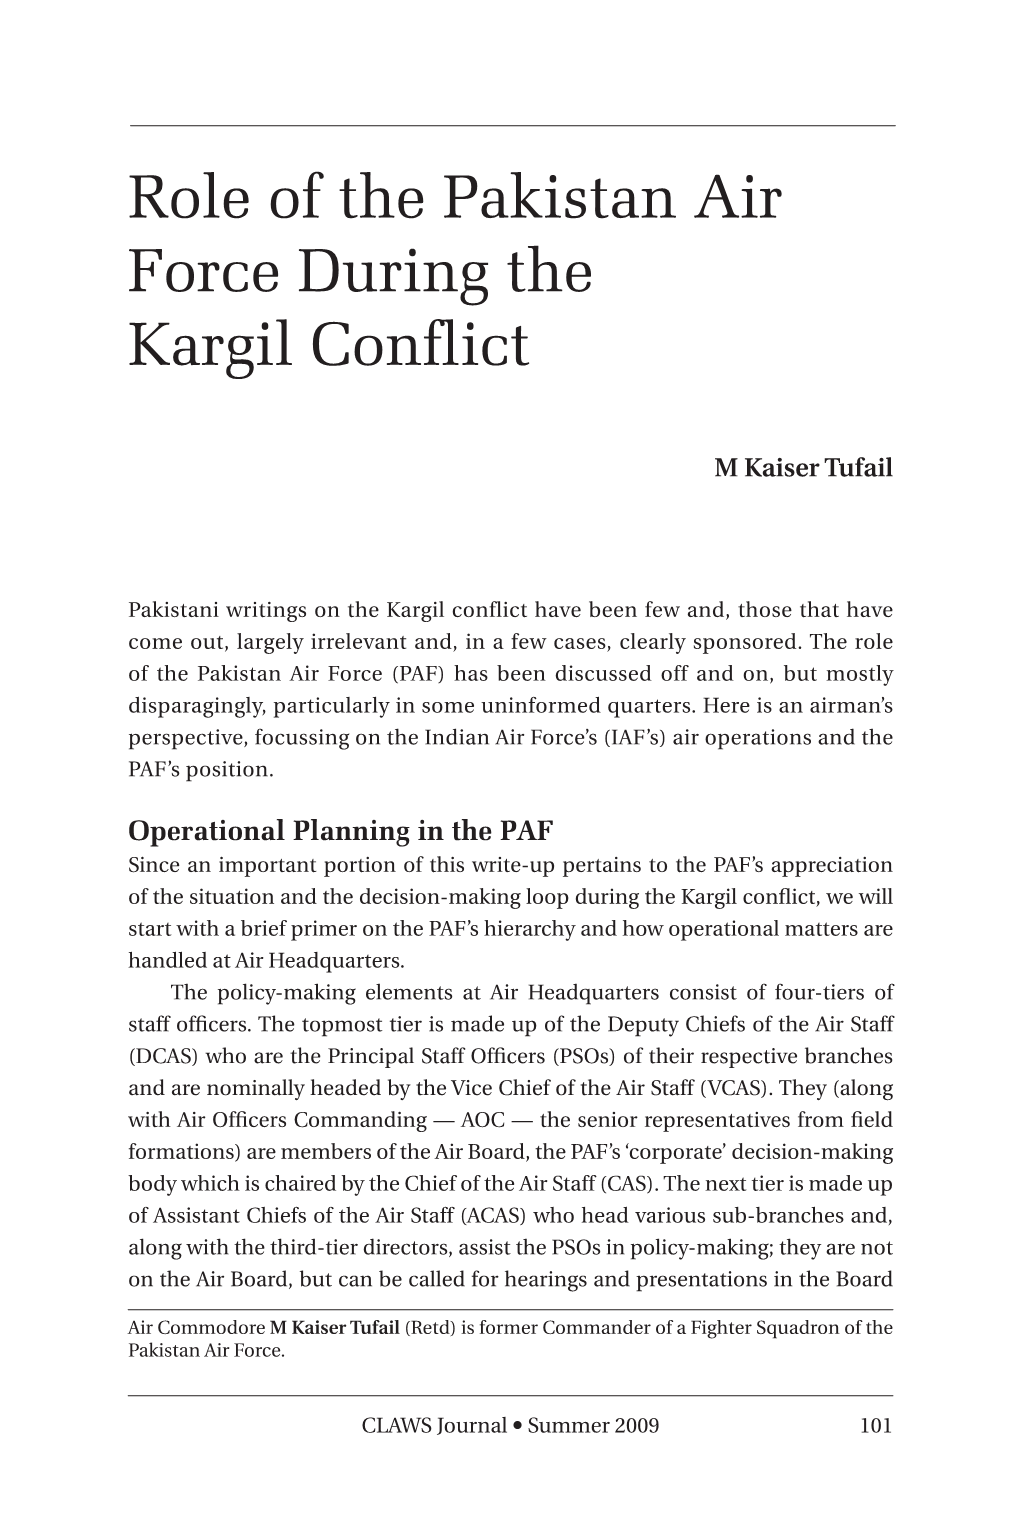 Role of the Pakistan Air Force During the Kargil Conflict, by M Kaiser Tufail